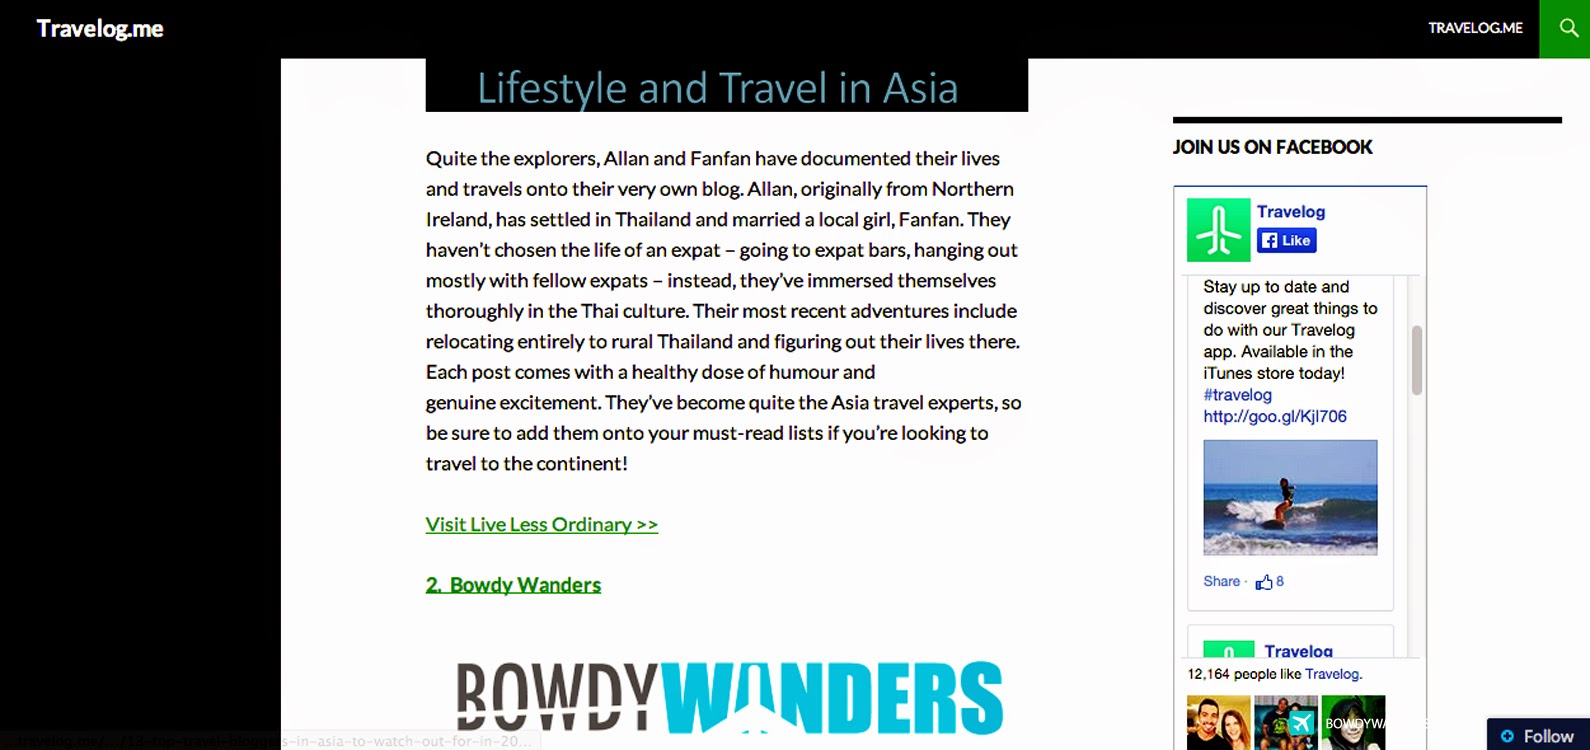 bowdywanders.com Singapore Travel Blog Philippines Photo :: Singapore :: 13 Travel Bloggers in Asia To Watch Out For in 2015